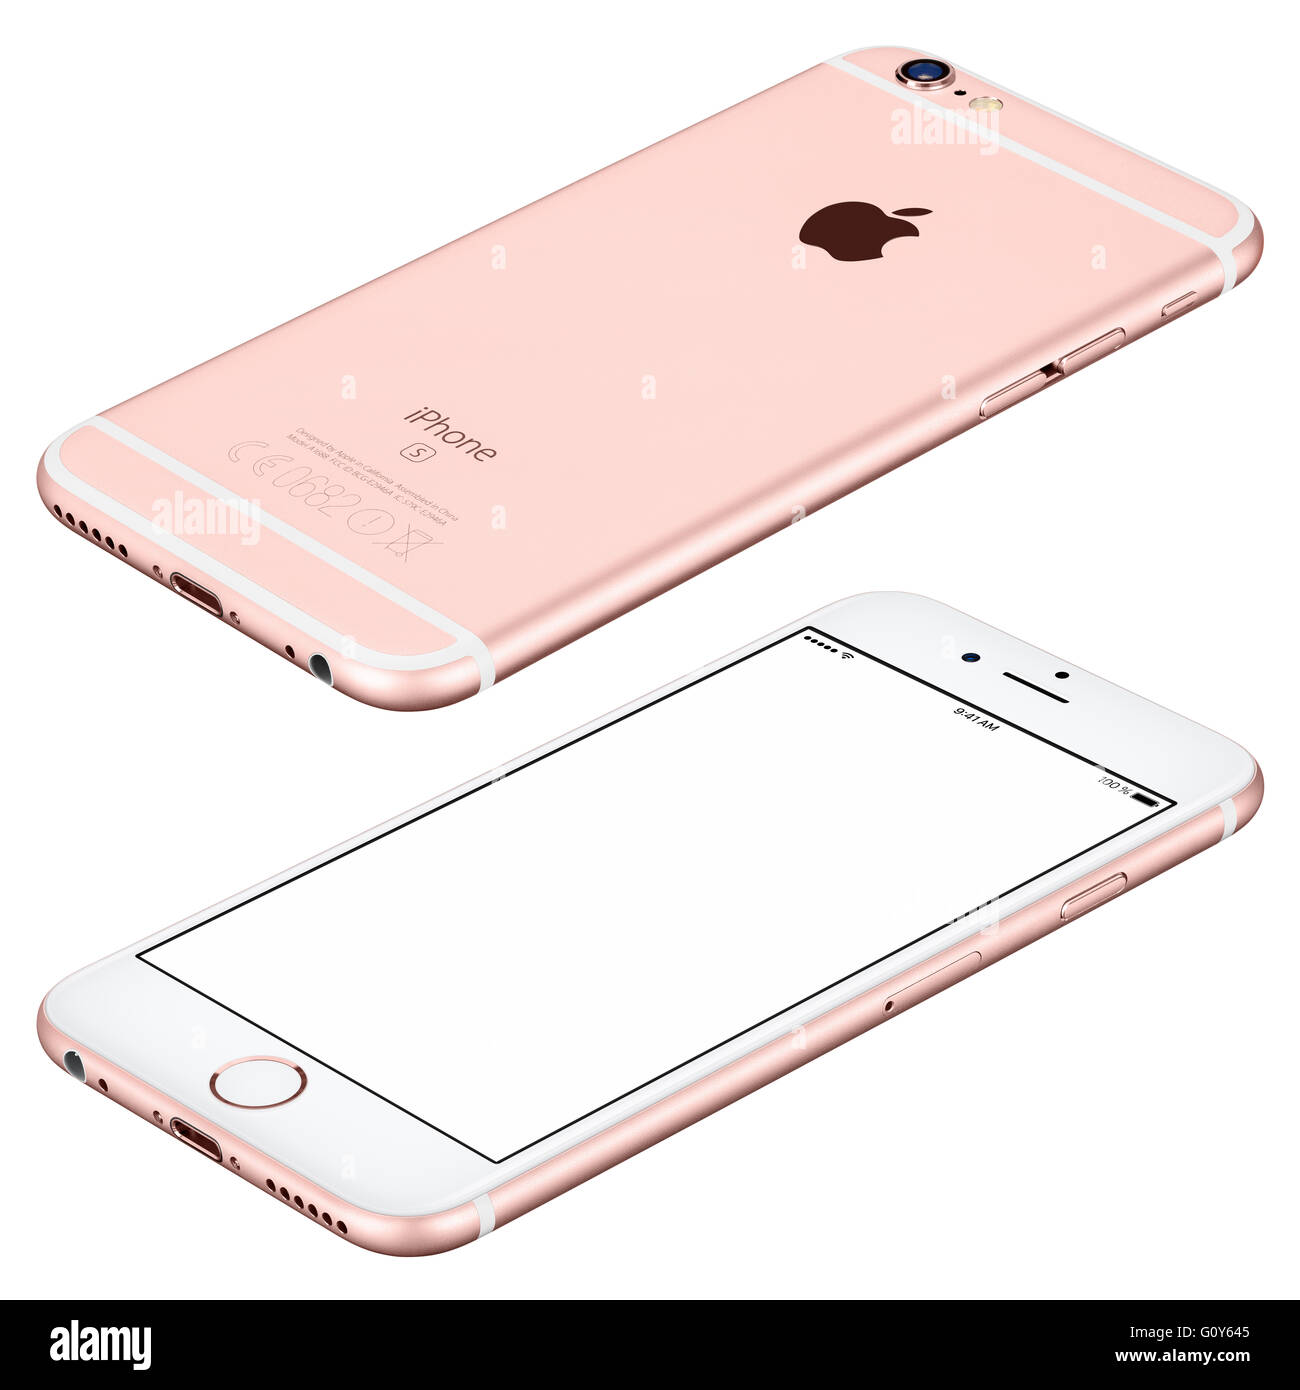 Varna, Bulgaria - October 25, 2015: Rose Gold Apple iPhone 6s mockup lies on the surface clockwise rotated with white screen Stock Photo